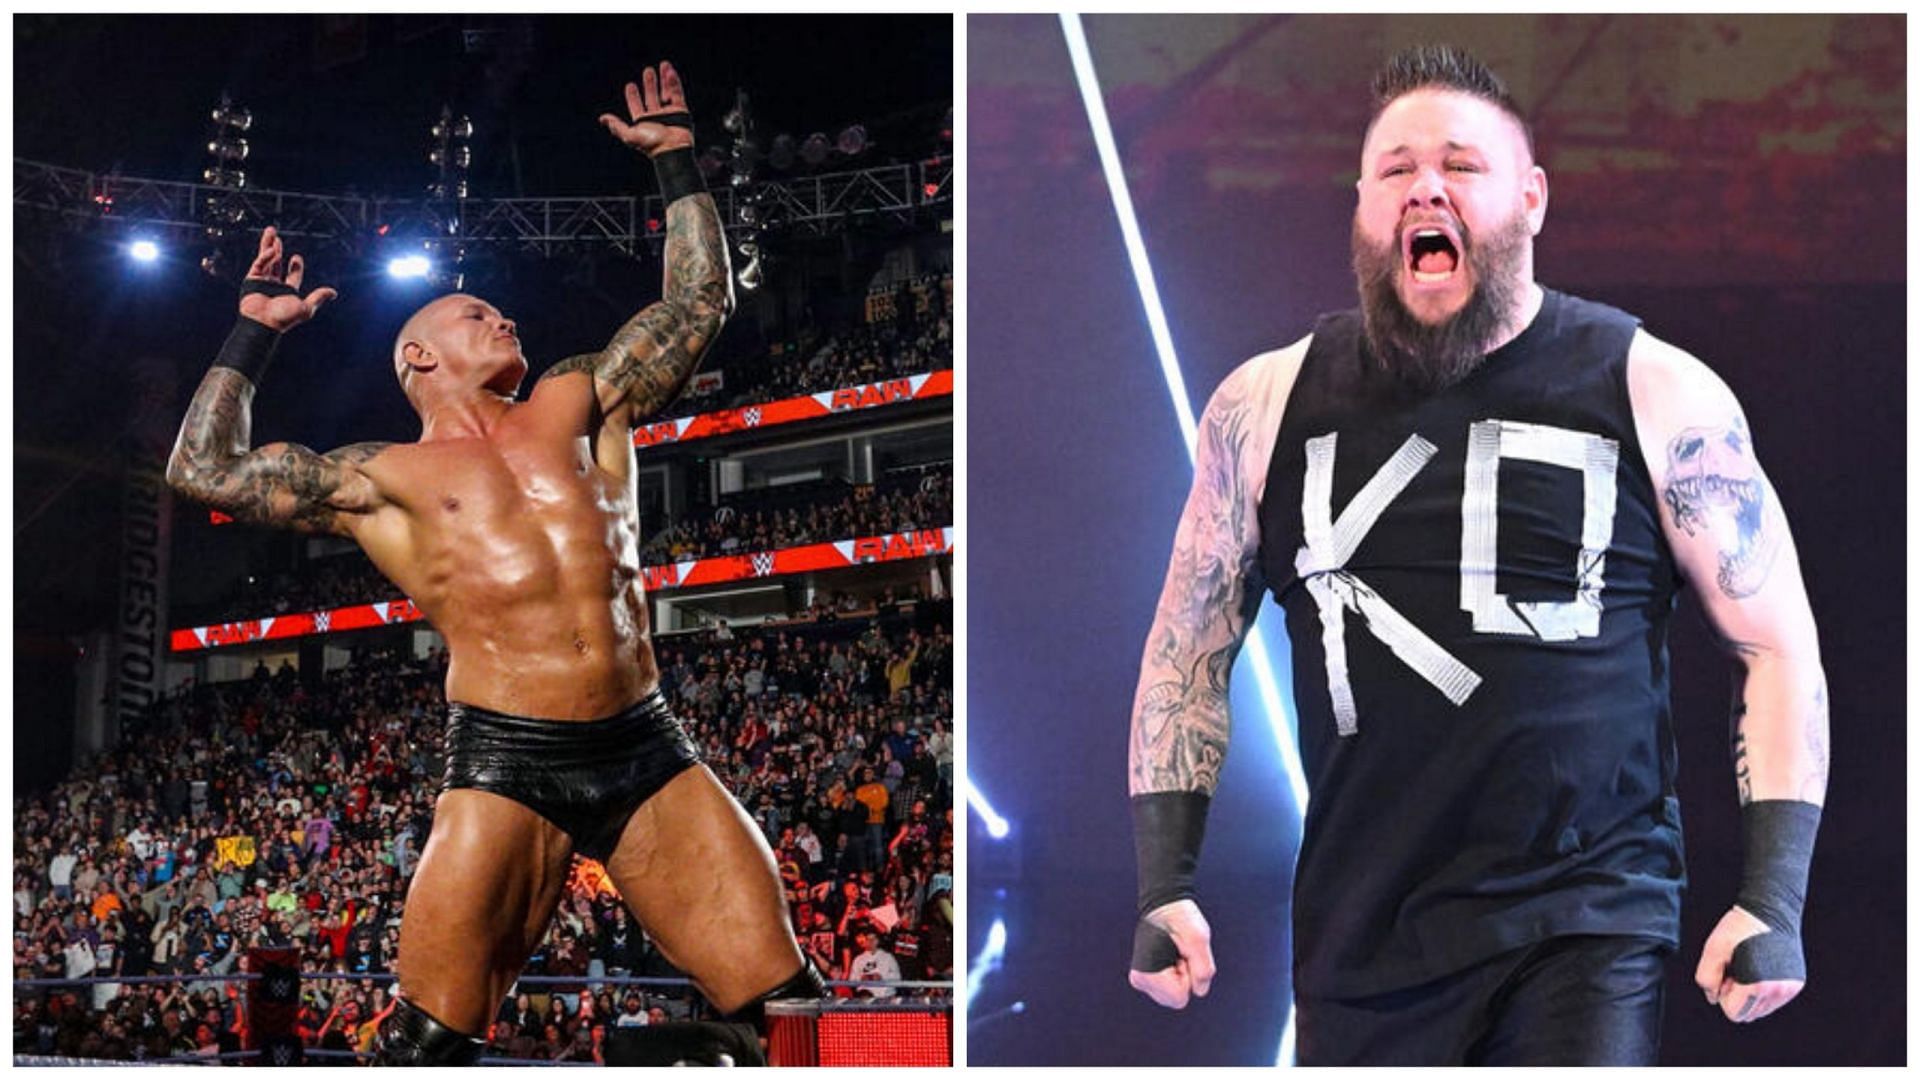 Randy Orton and Kevin Owens will compete for the United States Championship at WrestleMania 40 (Photo credit: WWE.com)